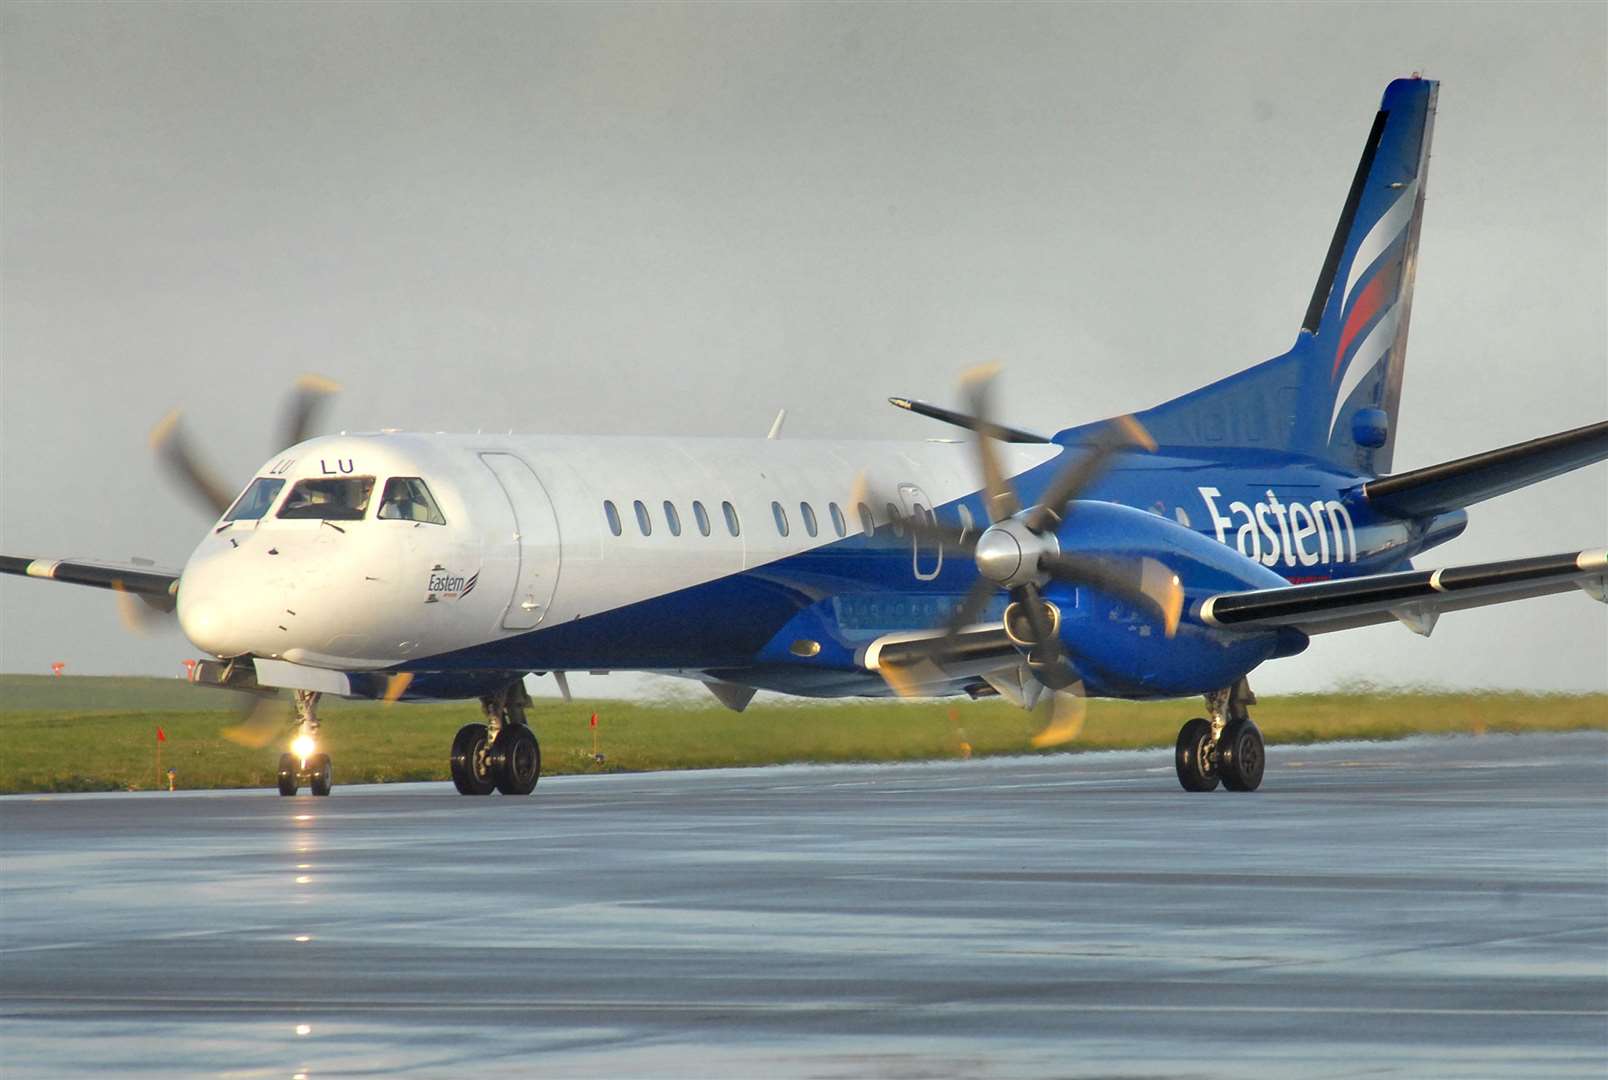 Eastern Airways will continue operating services following the collapse of Flybe.